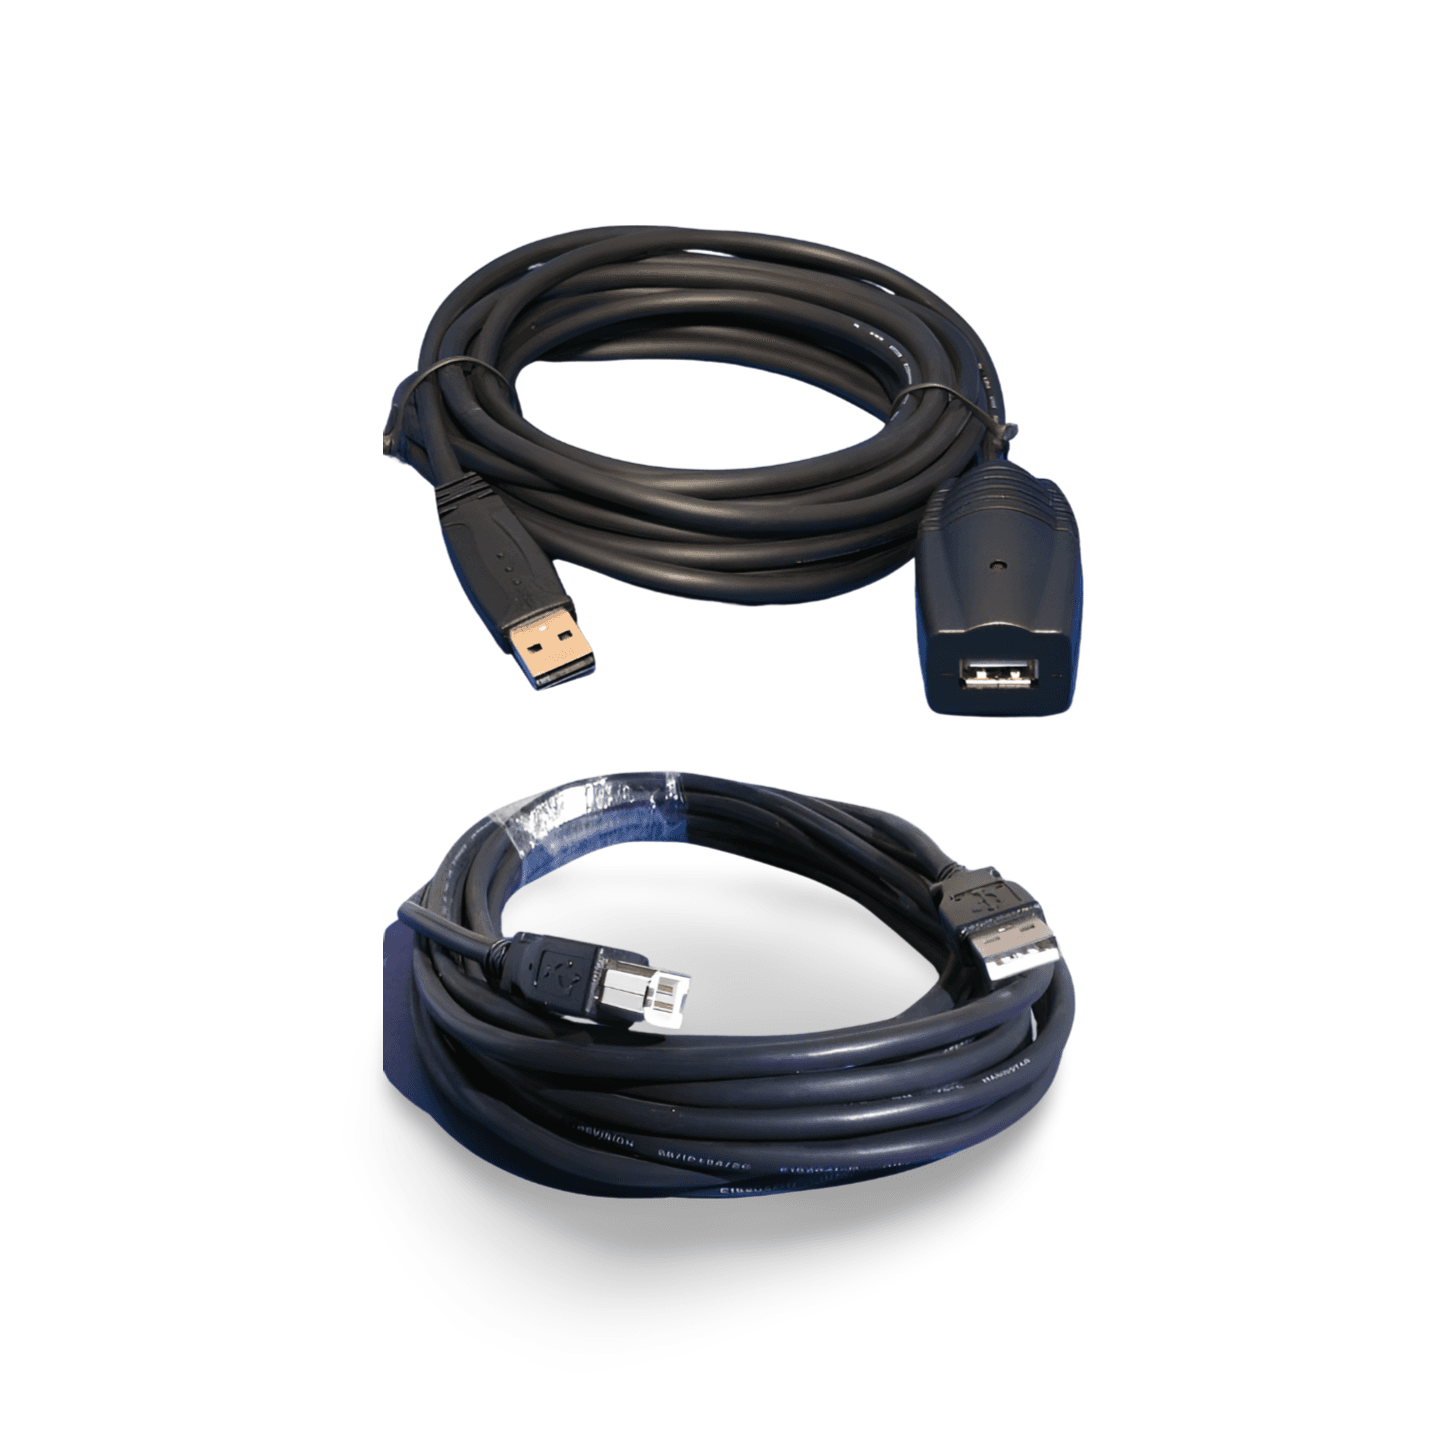 30ft USB 2.0 Computer Cable Type A to Type B Cable Kit black